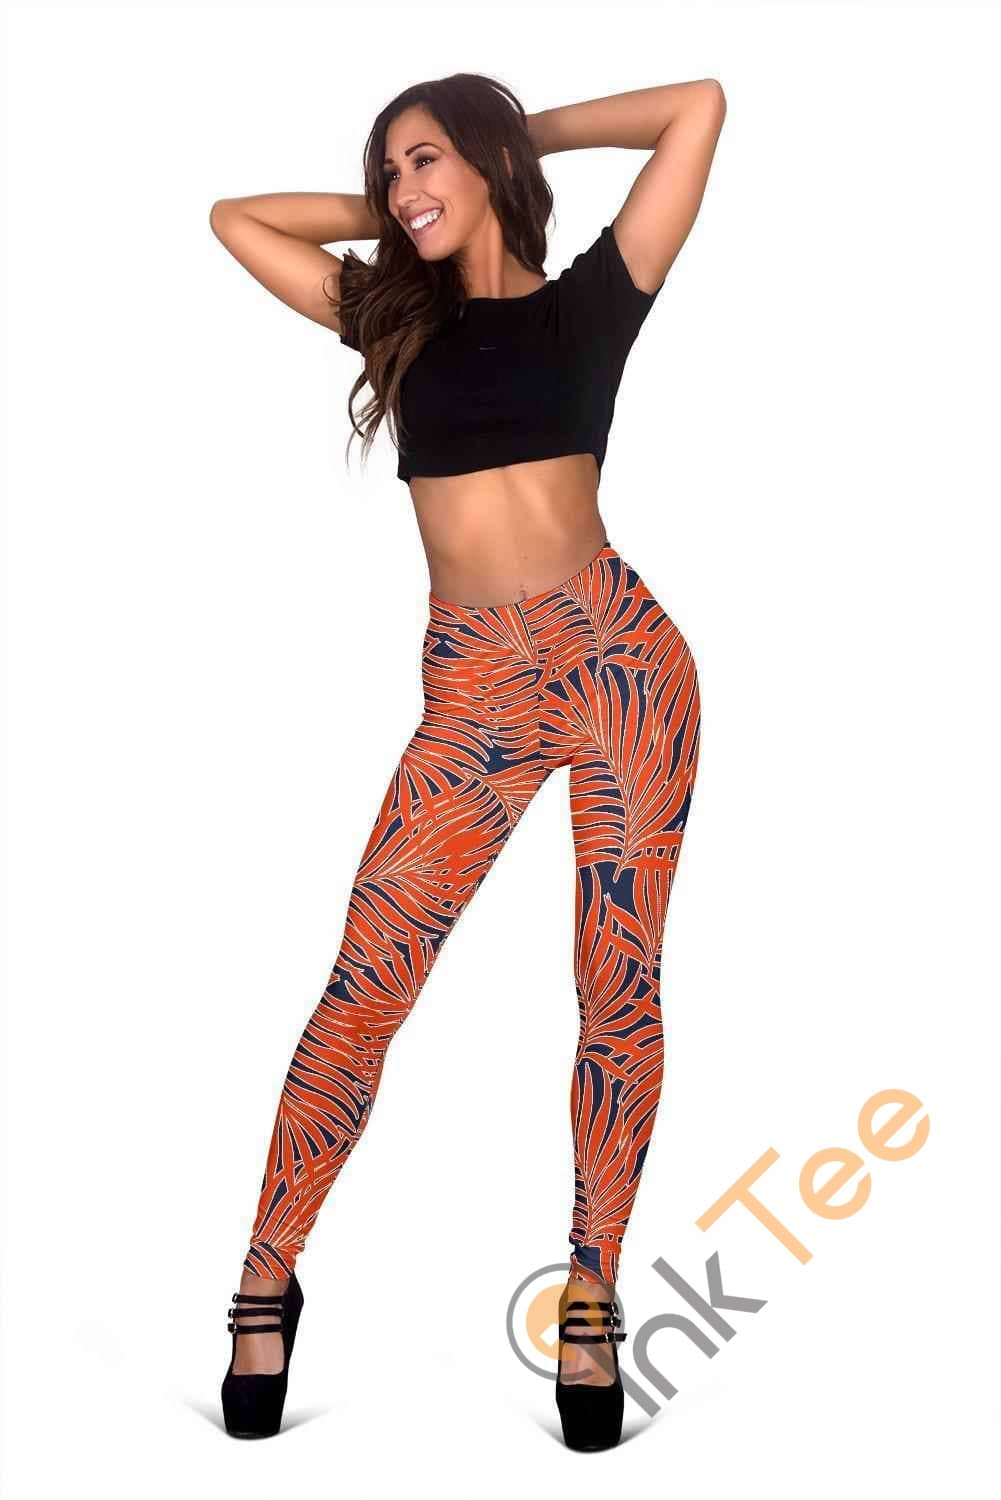 Inktee Store - Virginia Cavaliers Fans 3D All Over Print For Yoga Fitness Women'S Leggings Image